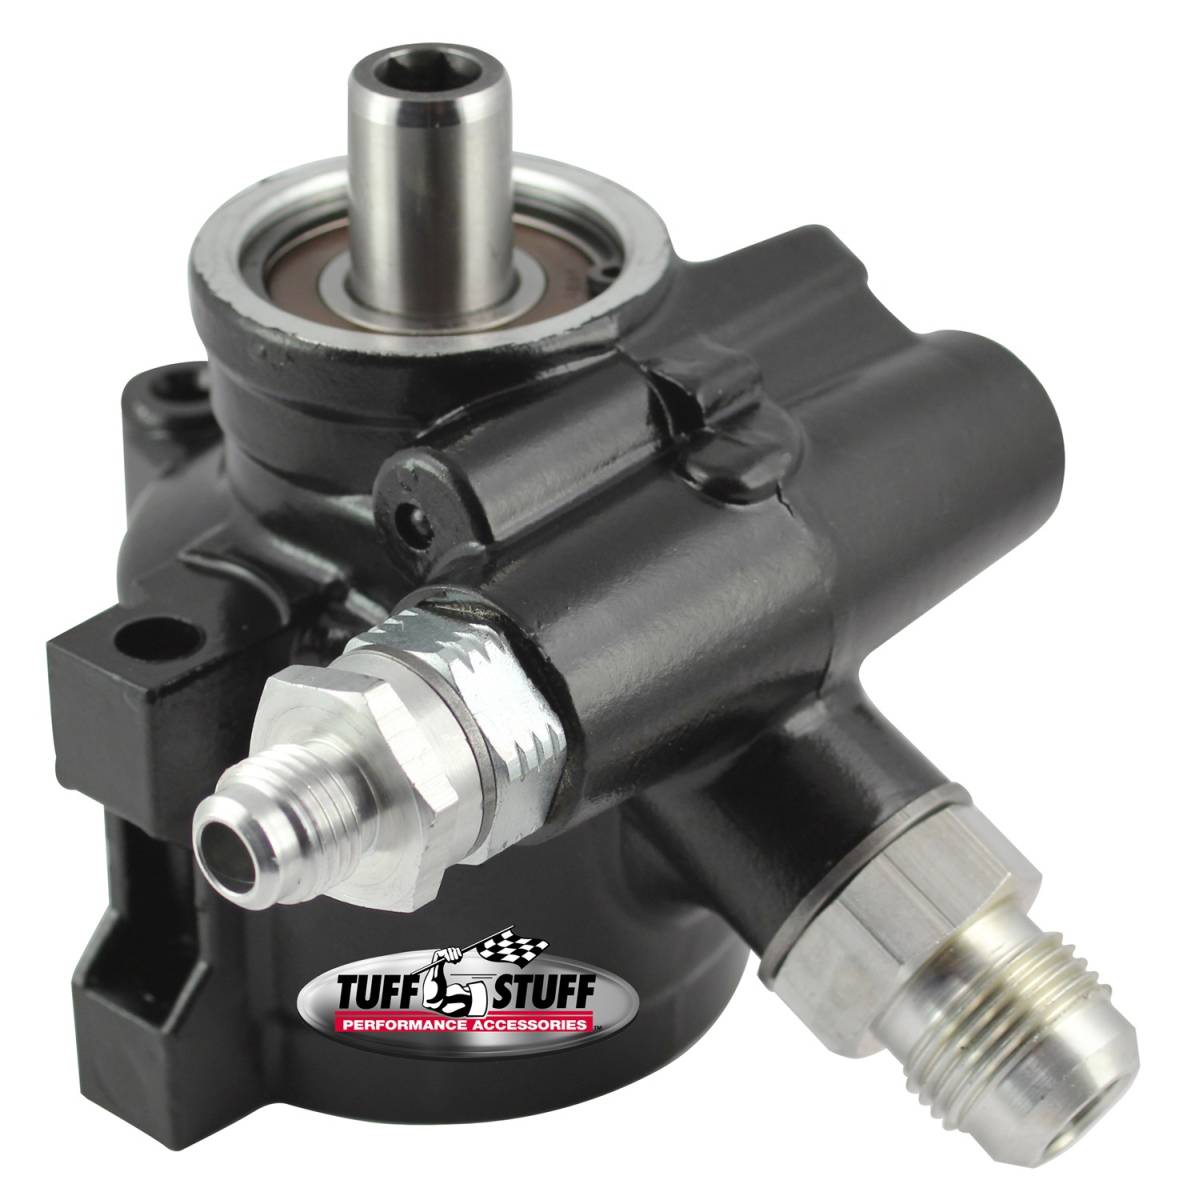 Tuff Stuff Performance - Type II Alum. Power Steering Pump AN-6 And AN-10 Fitting 8mm Through Hole Mounting Btm Pressure Port Aluminum For Street Rods/Custom Vehicles w/Limited Engine Space Black 6170ALB